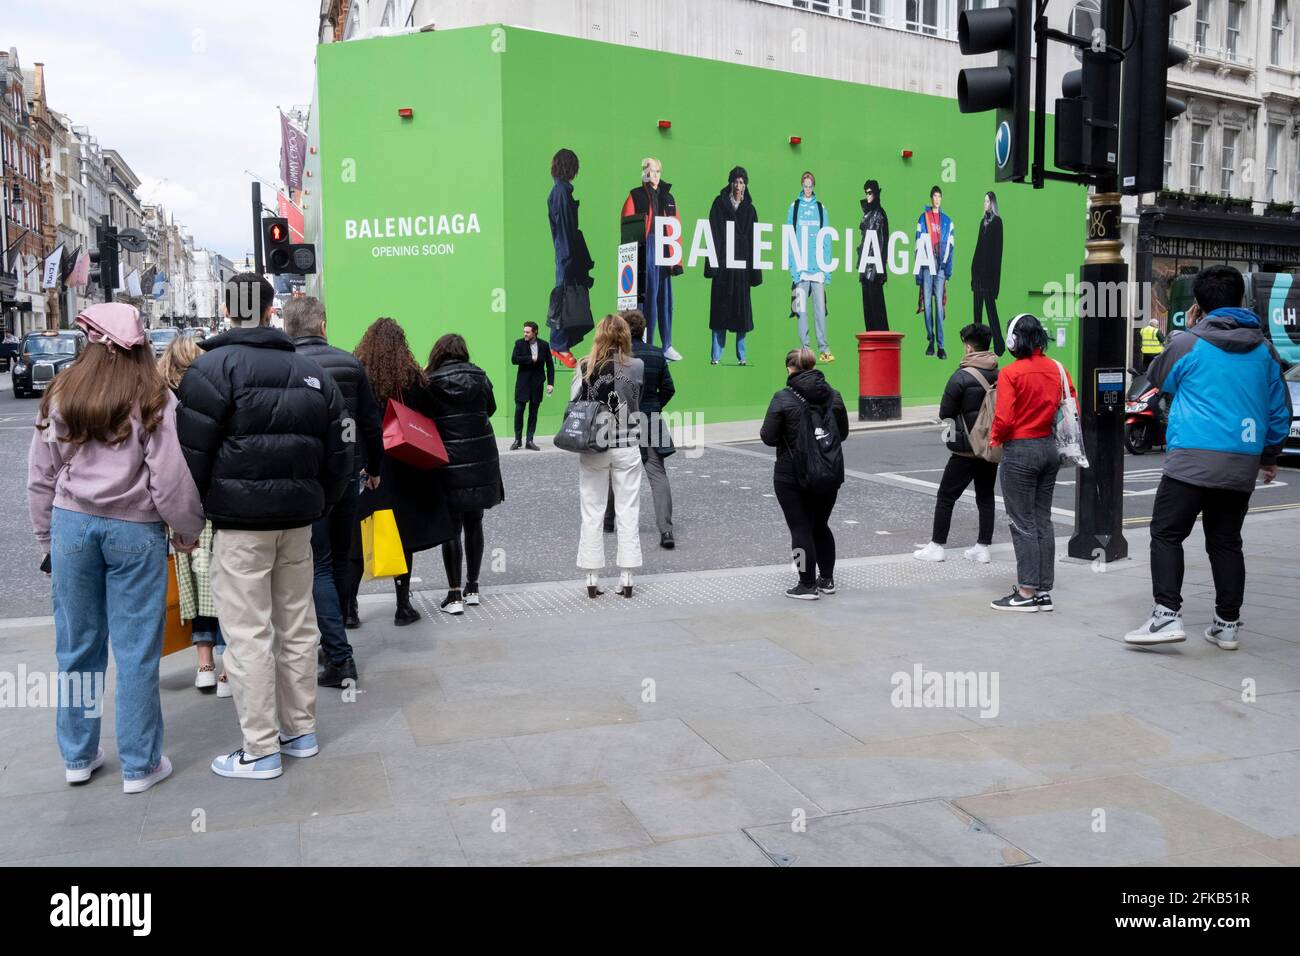 Shoppers cross the road towards the temporary hoarding for Balenciaga, a  retail space which is opening soon on Bond Street, on 27th April 2021, in  London, England. Balenciaga is a fashion house